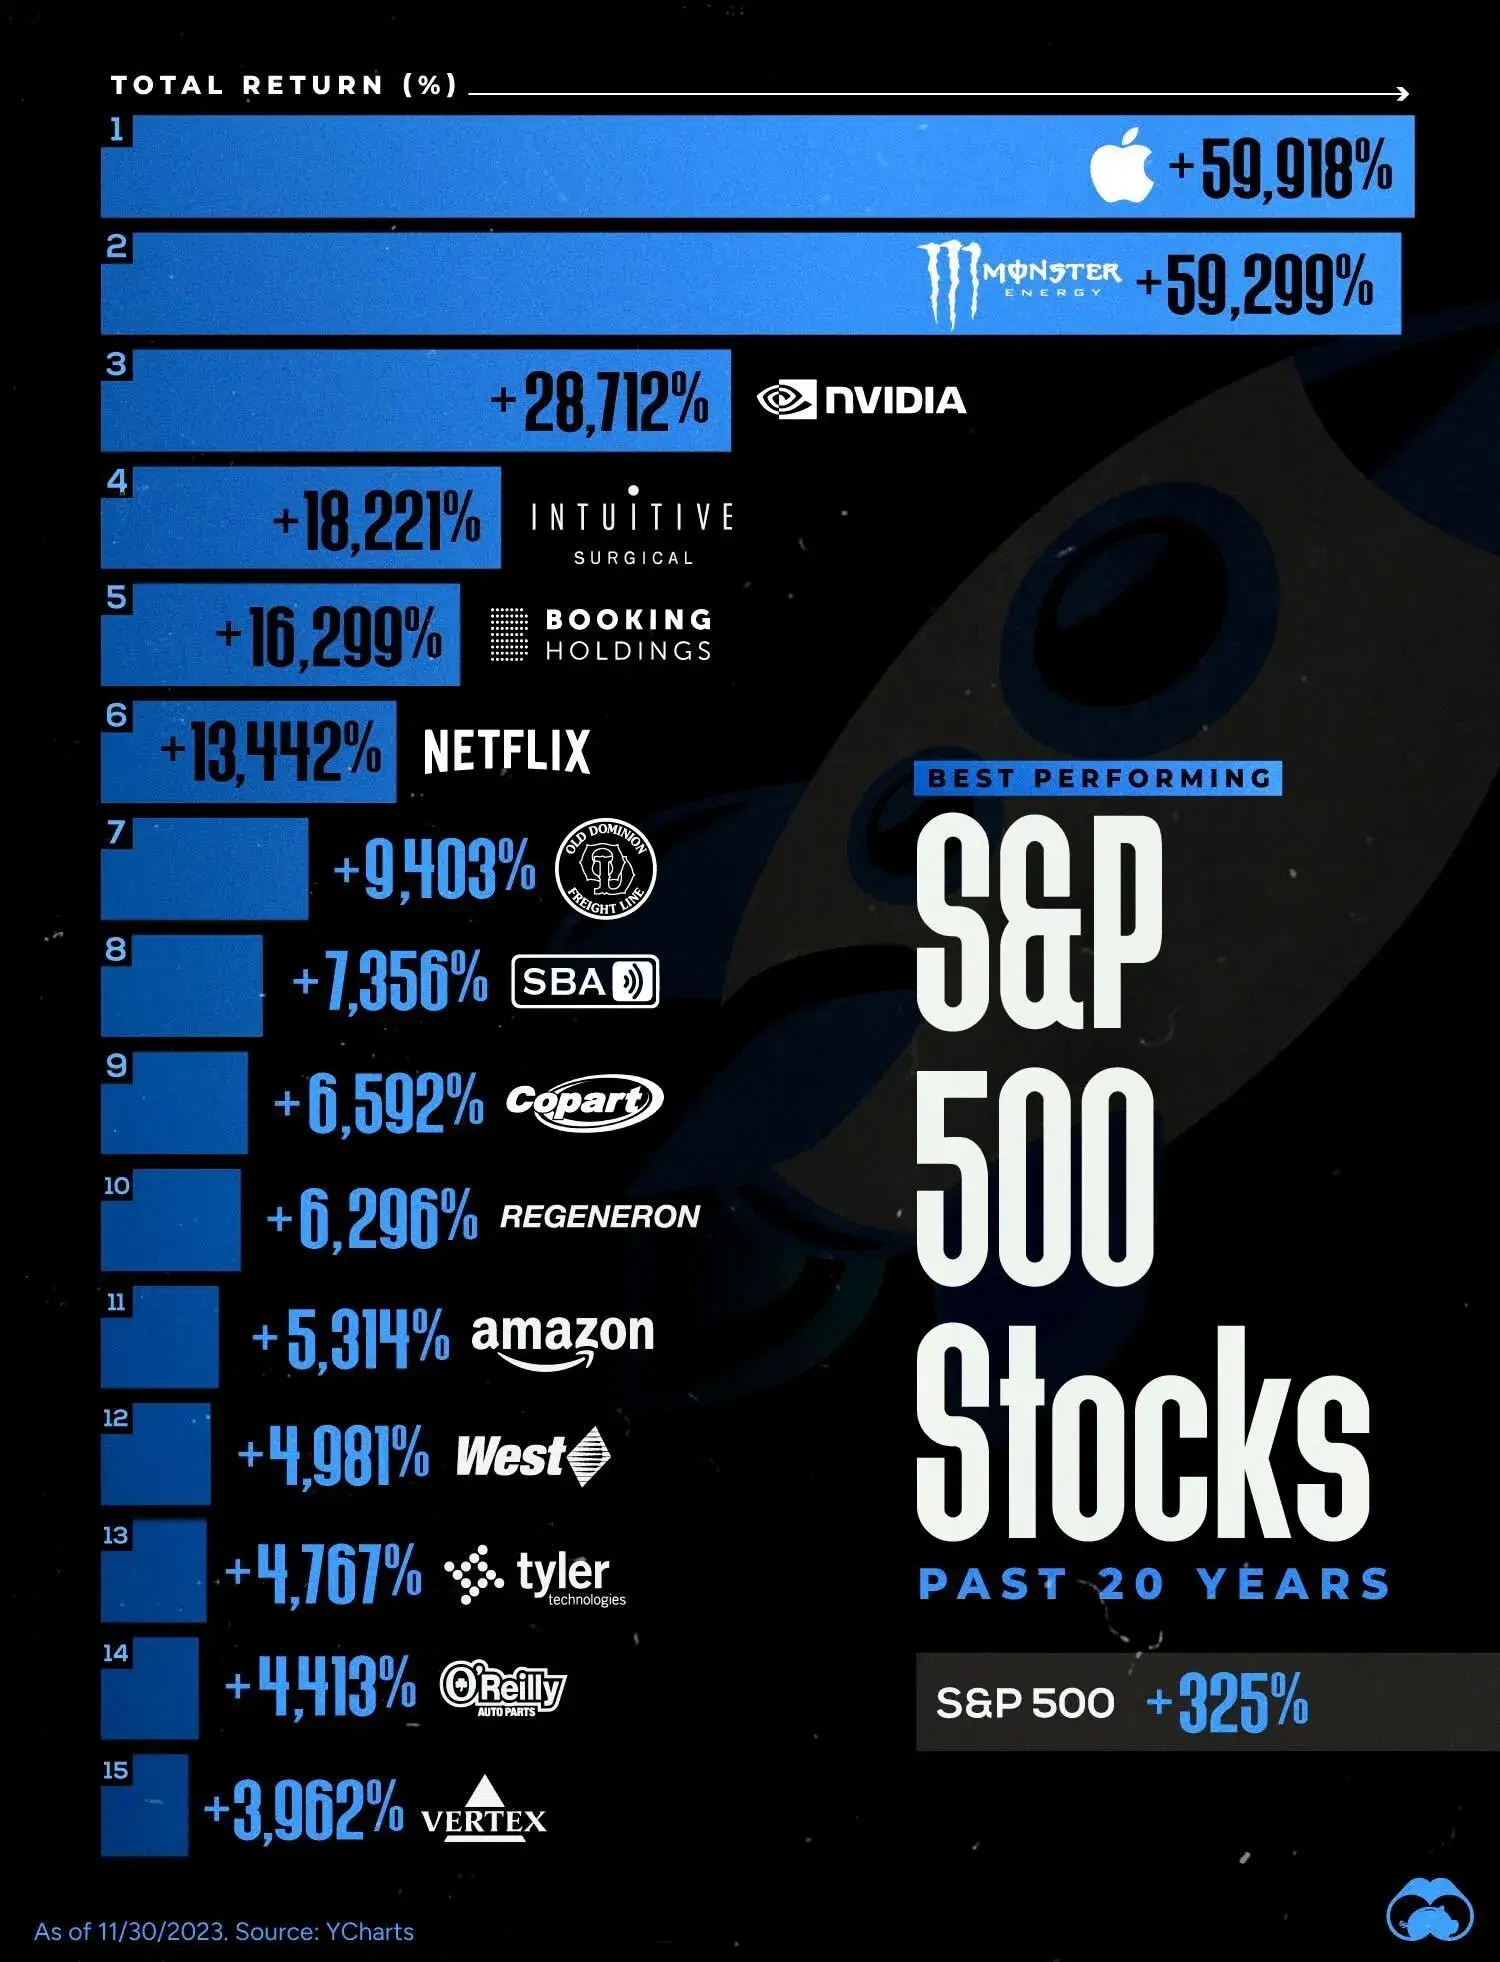 The Biggest Winners on the S&P 500 (Past 20 Years) 🐂